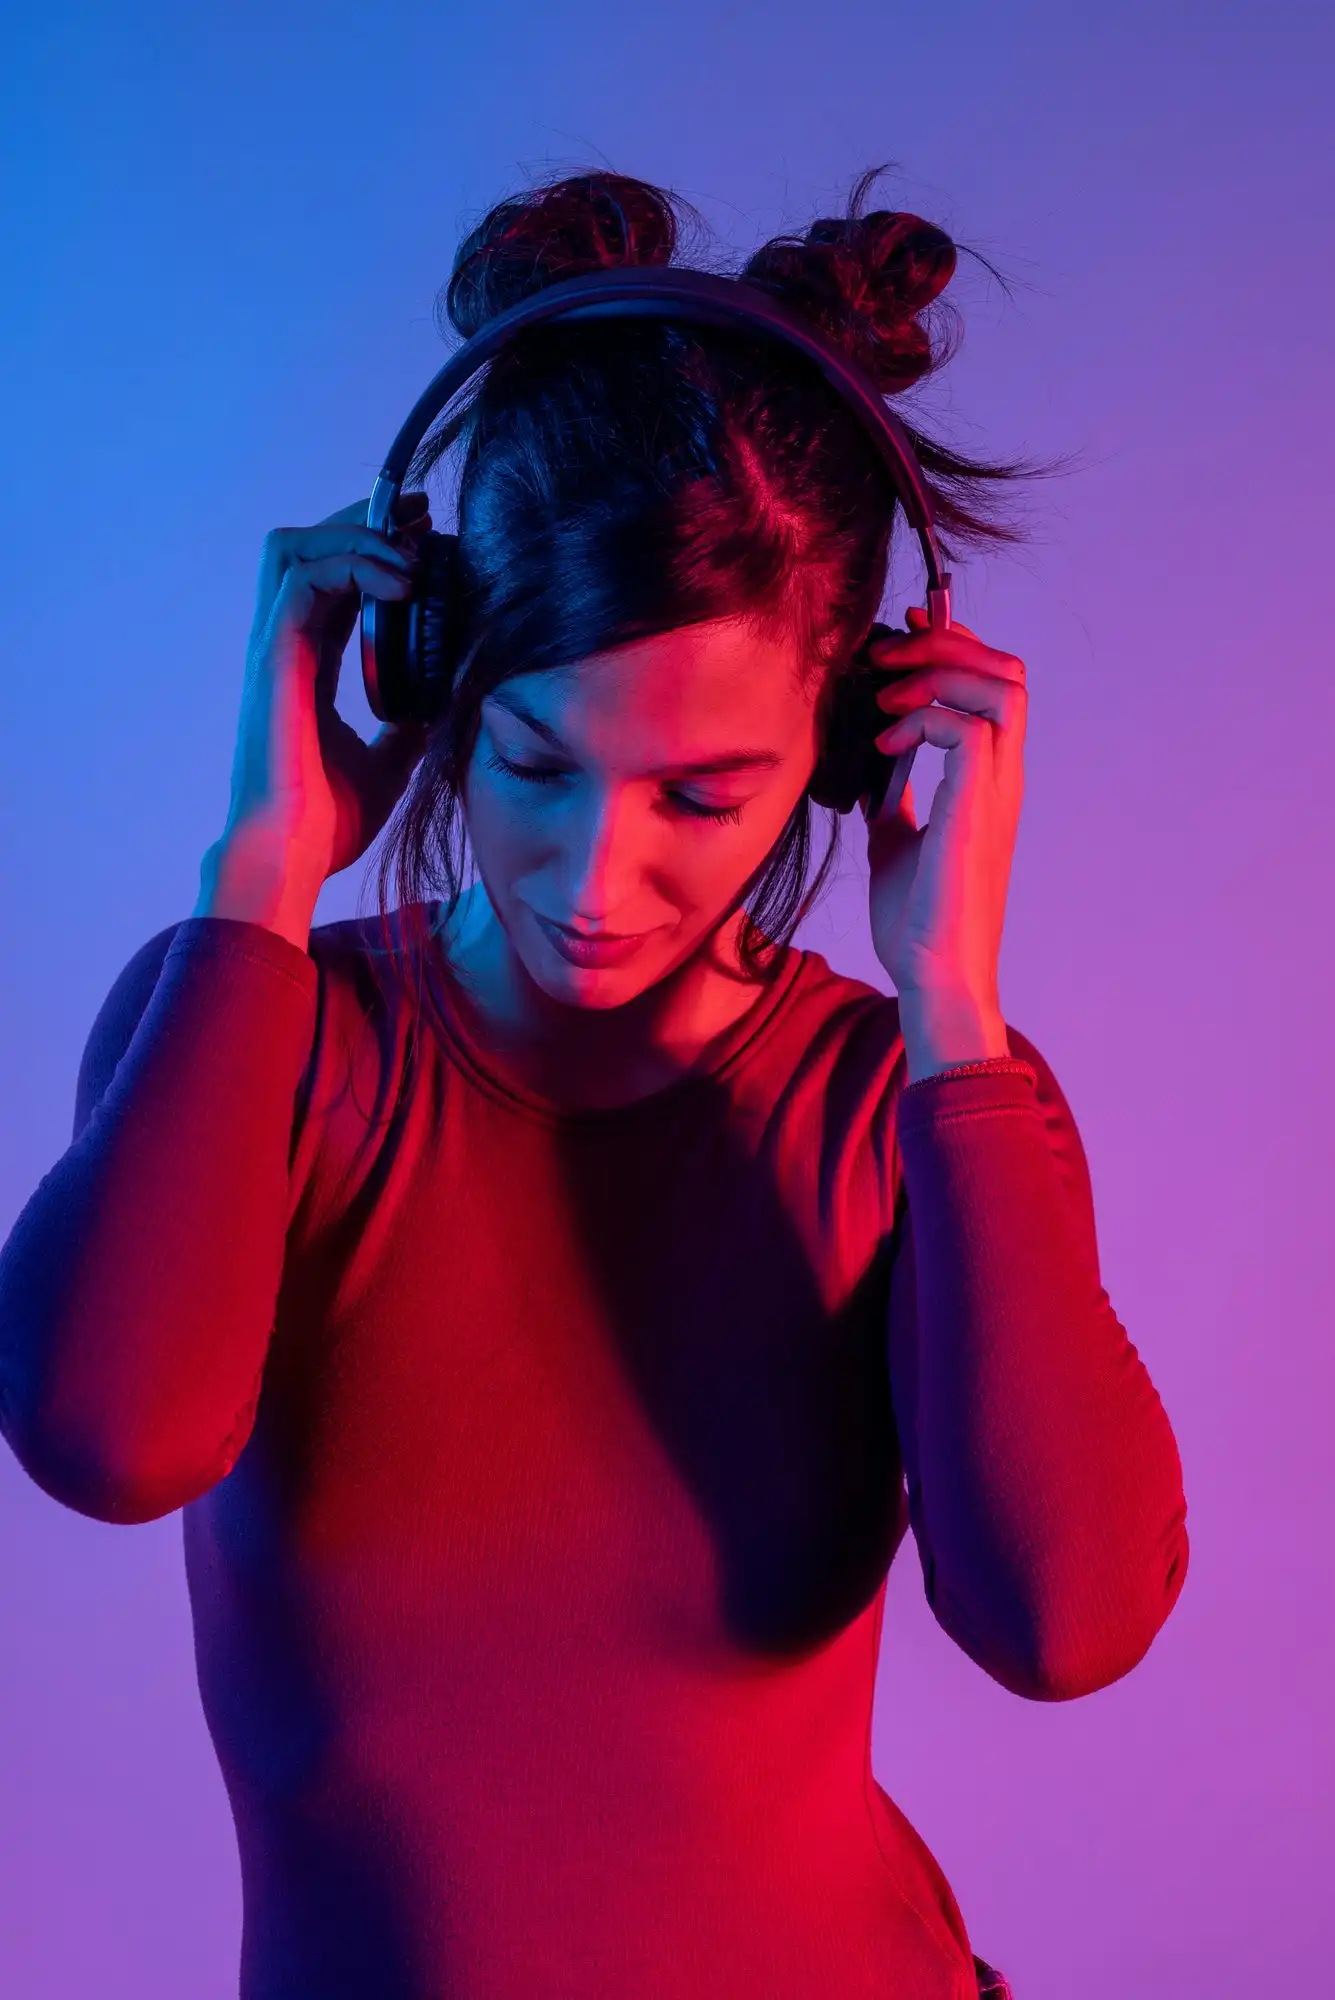 Attractive woman with headphones listening music in studio with blue and red lights